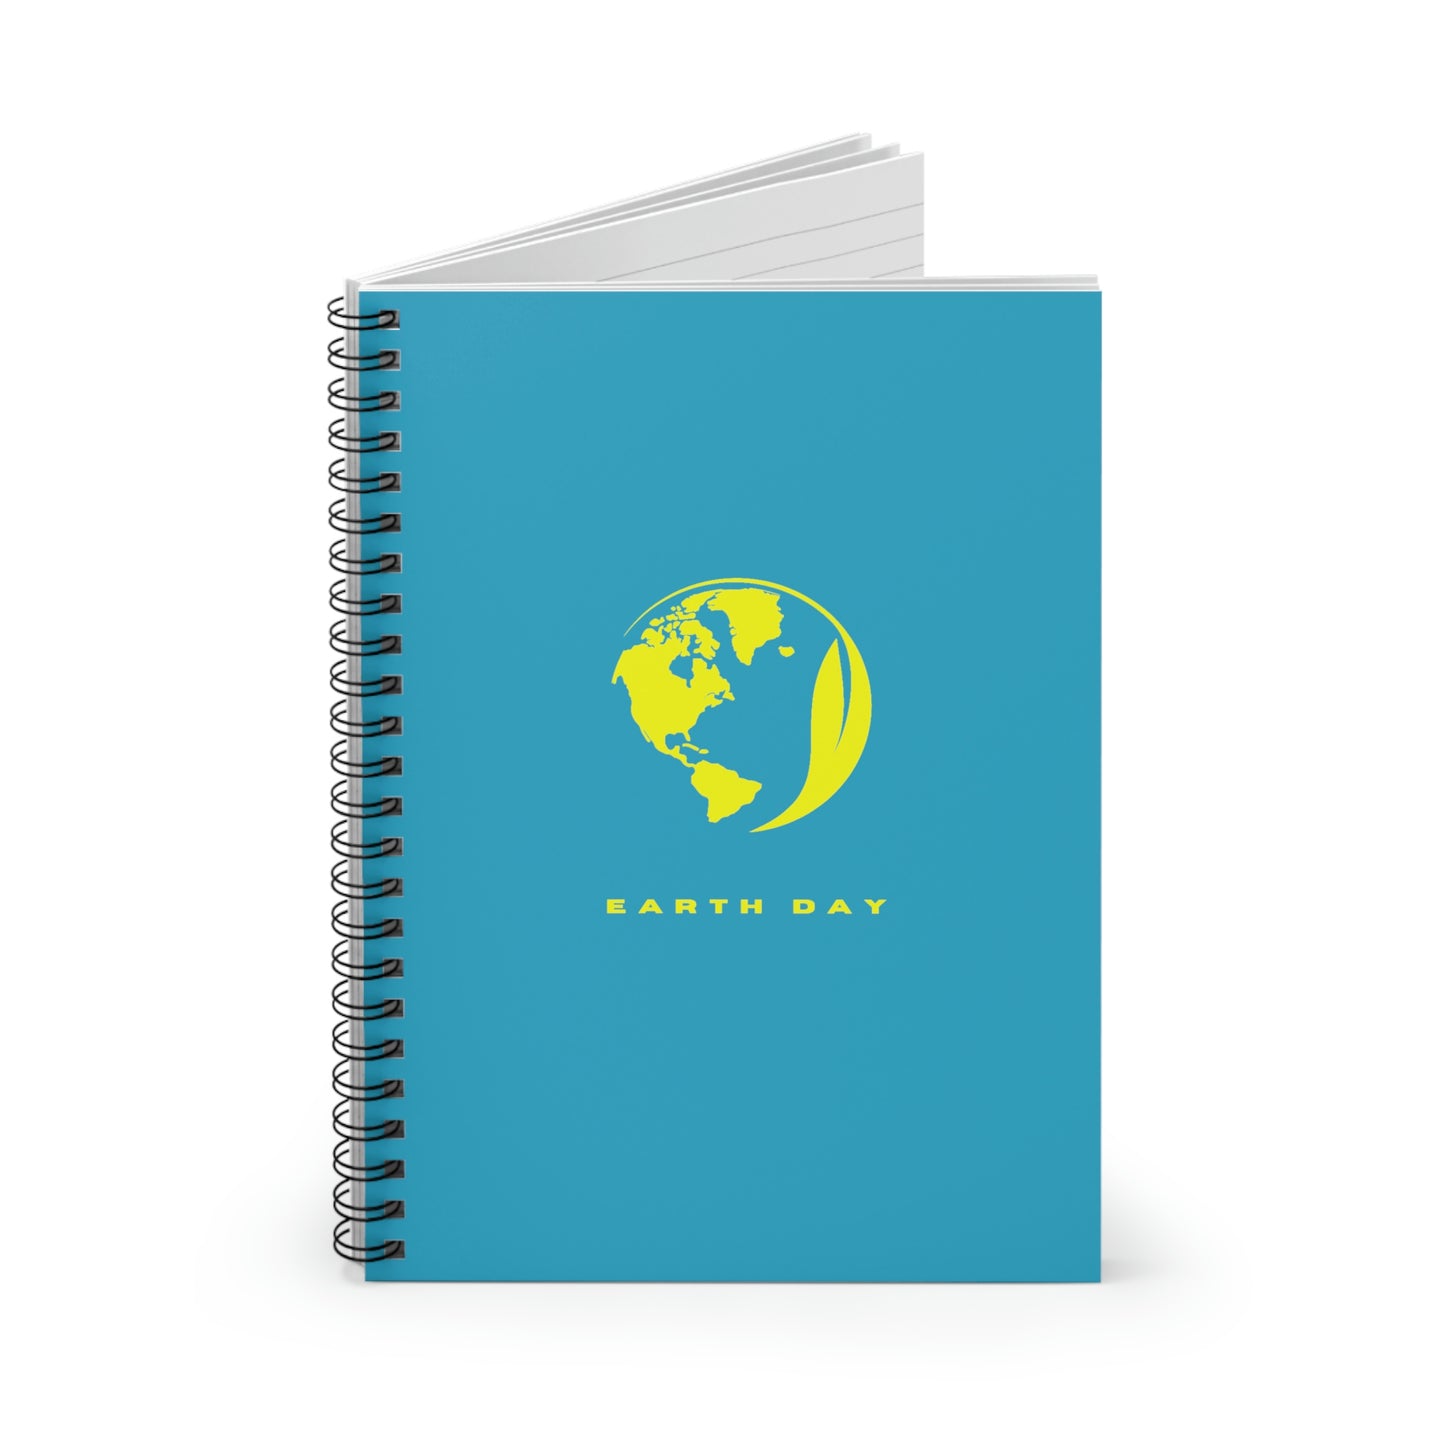 EARTH DAY - Spiral Notebook - Ruled Line - Blue Cover